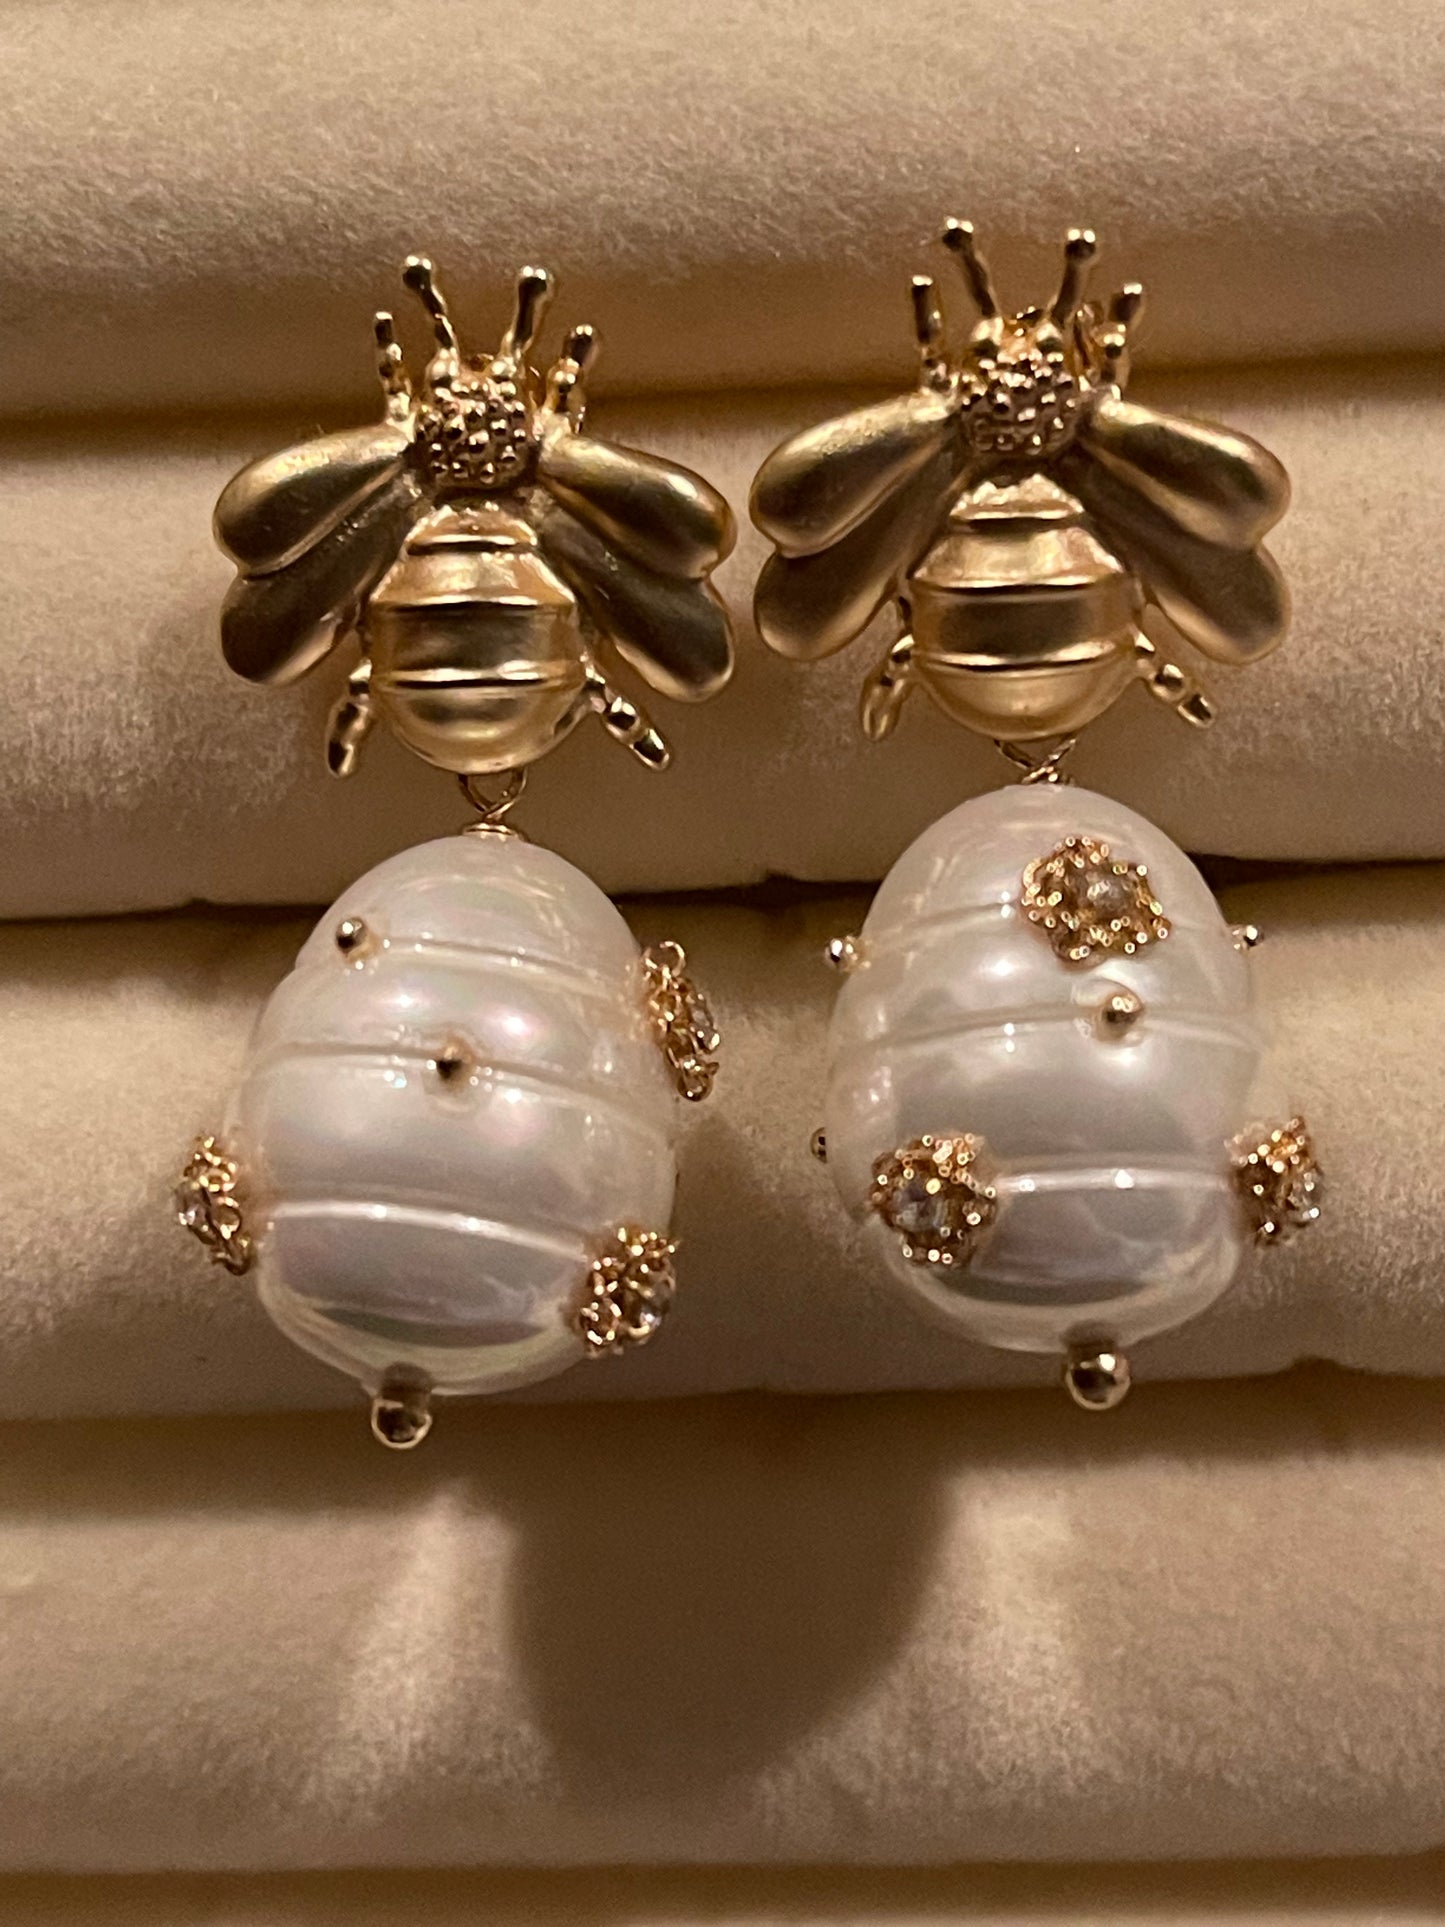 Bees for you earrings